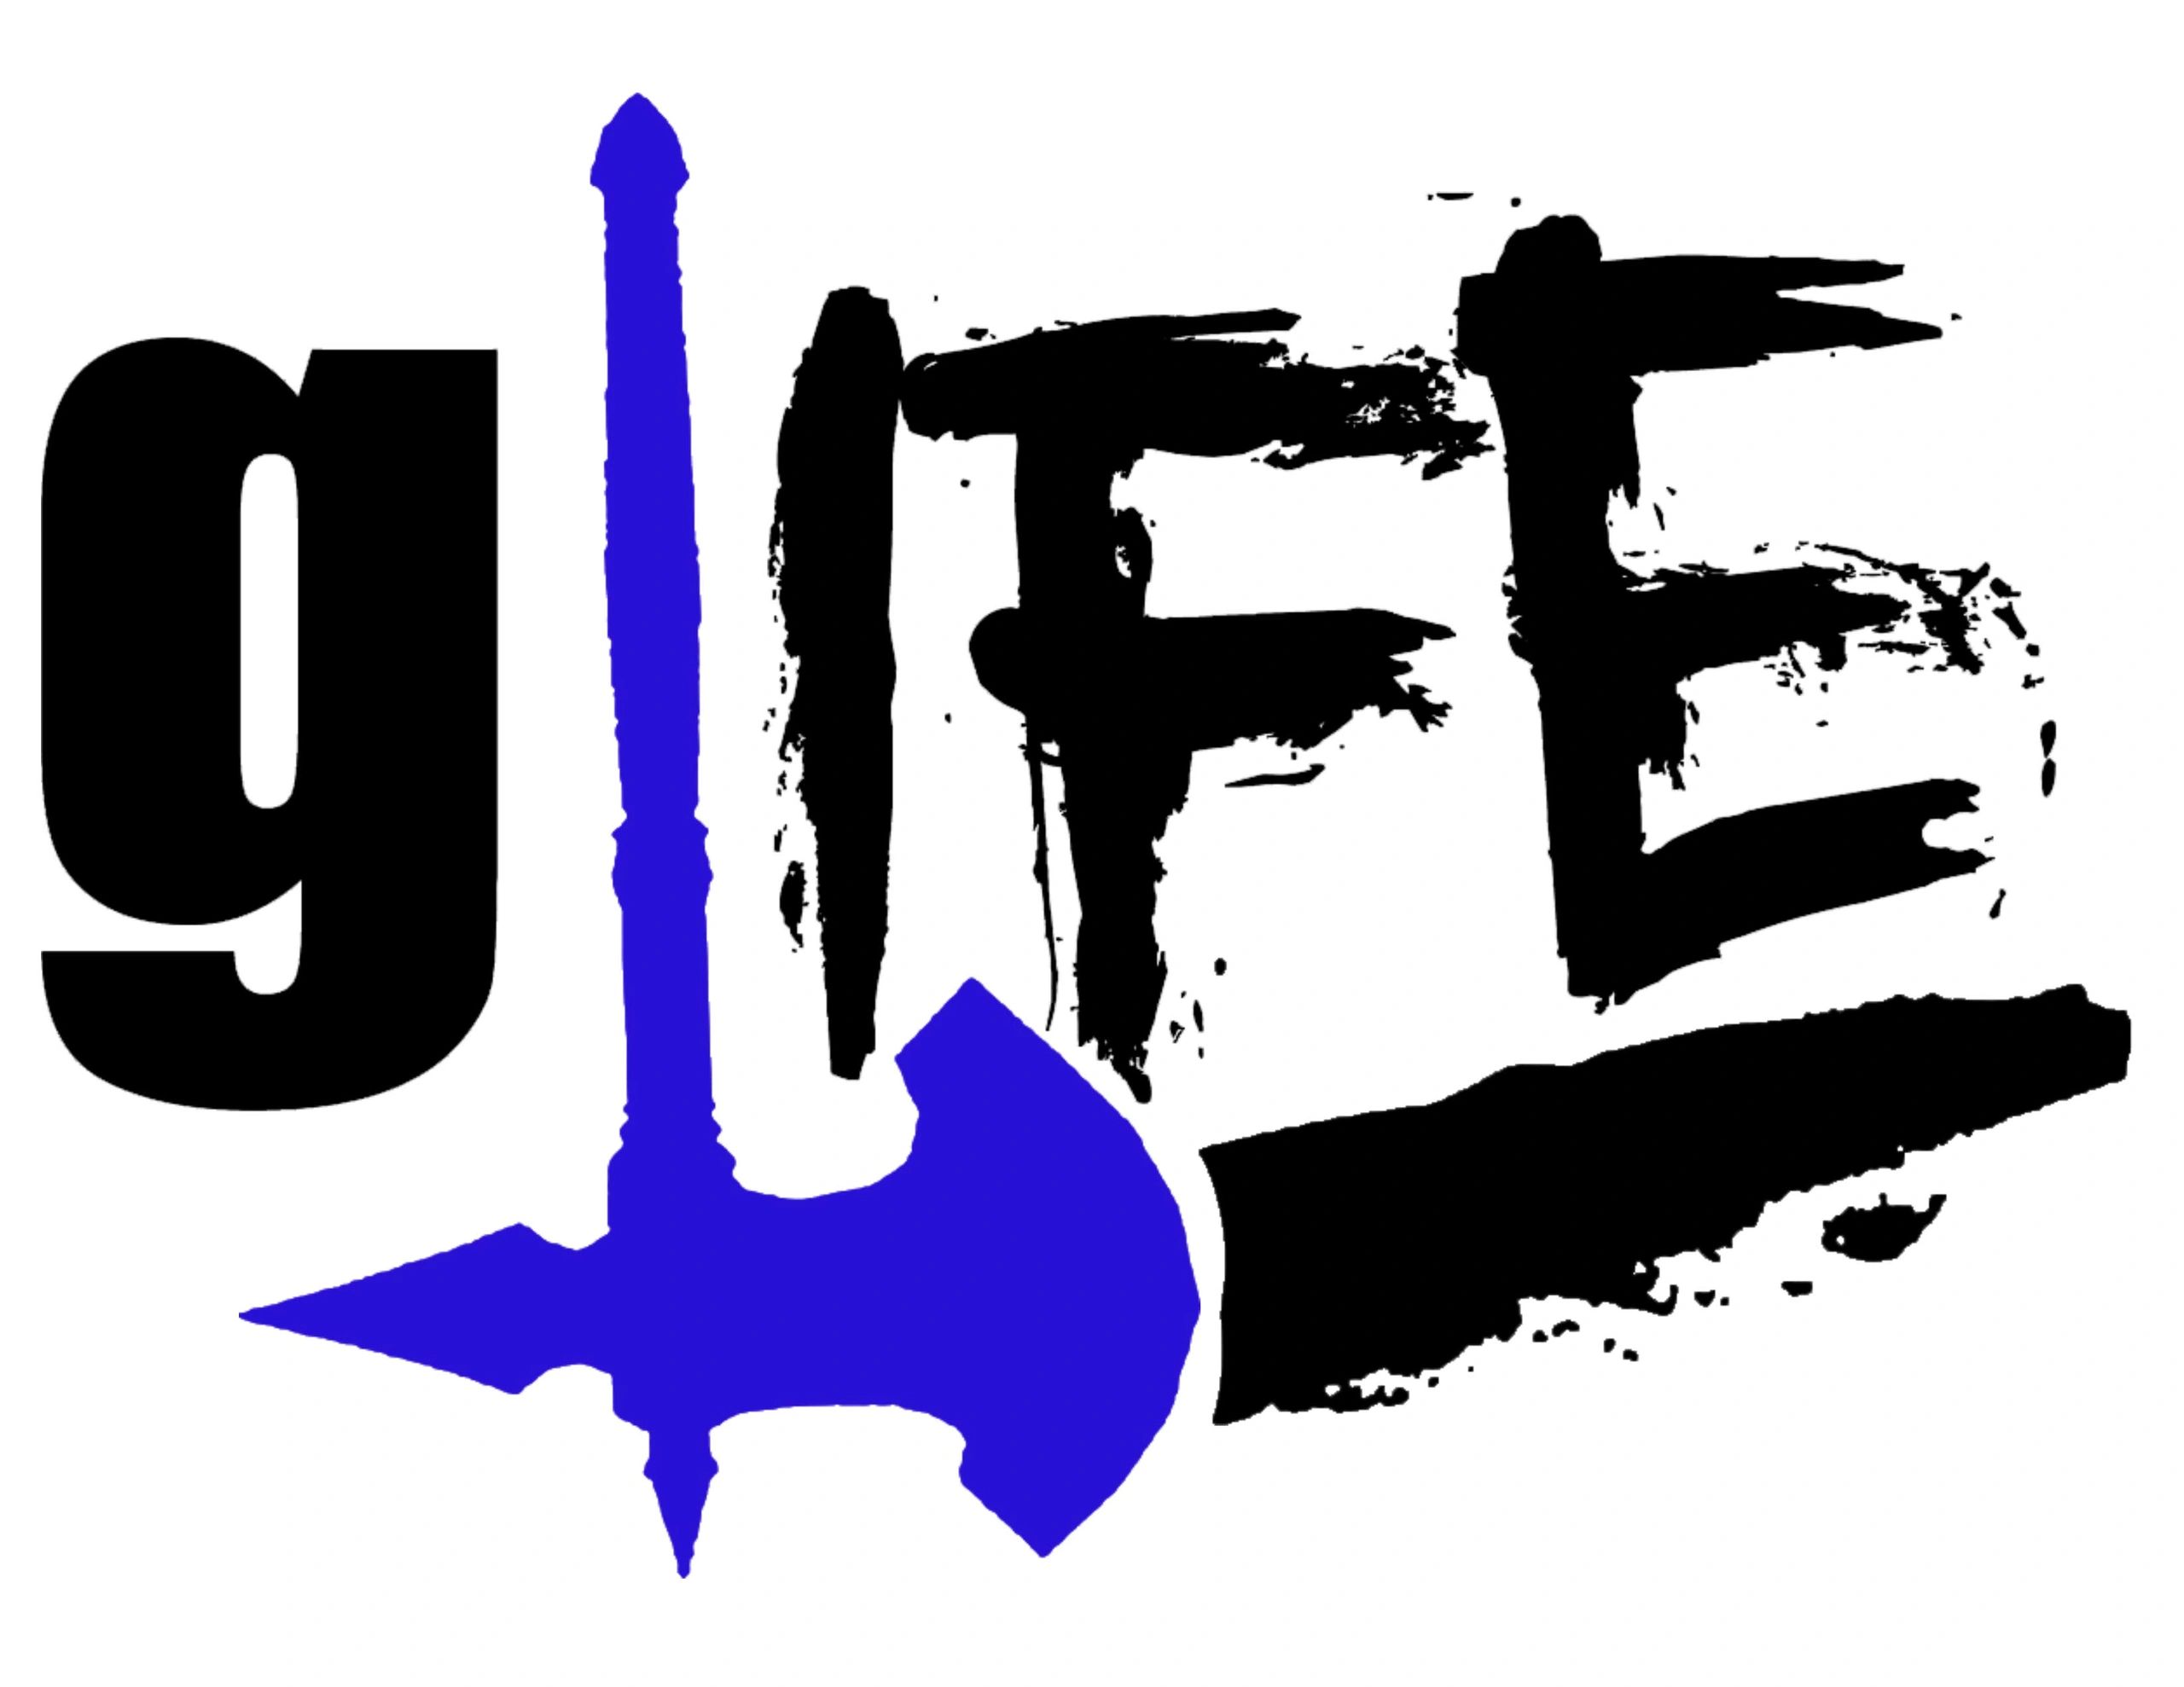 gLife official logo of hip hop artist from Utah g-life aka georgelife the underground rapper